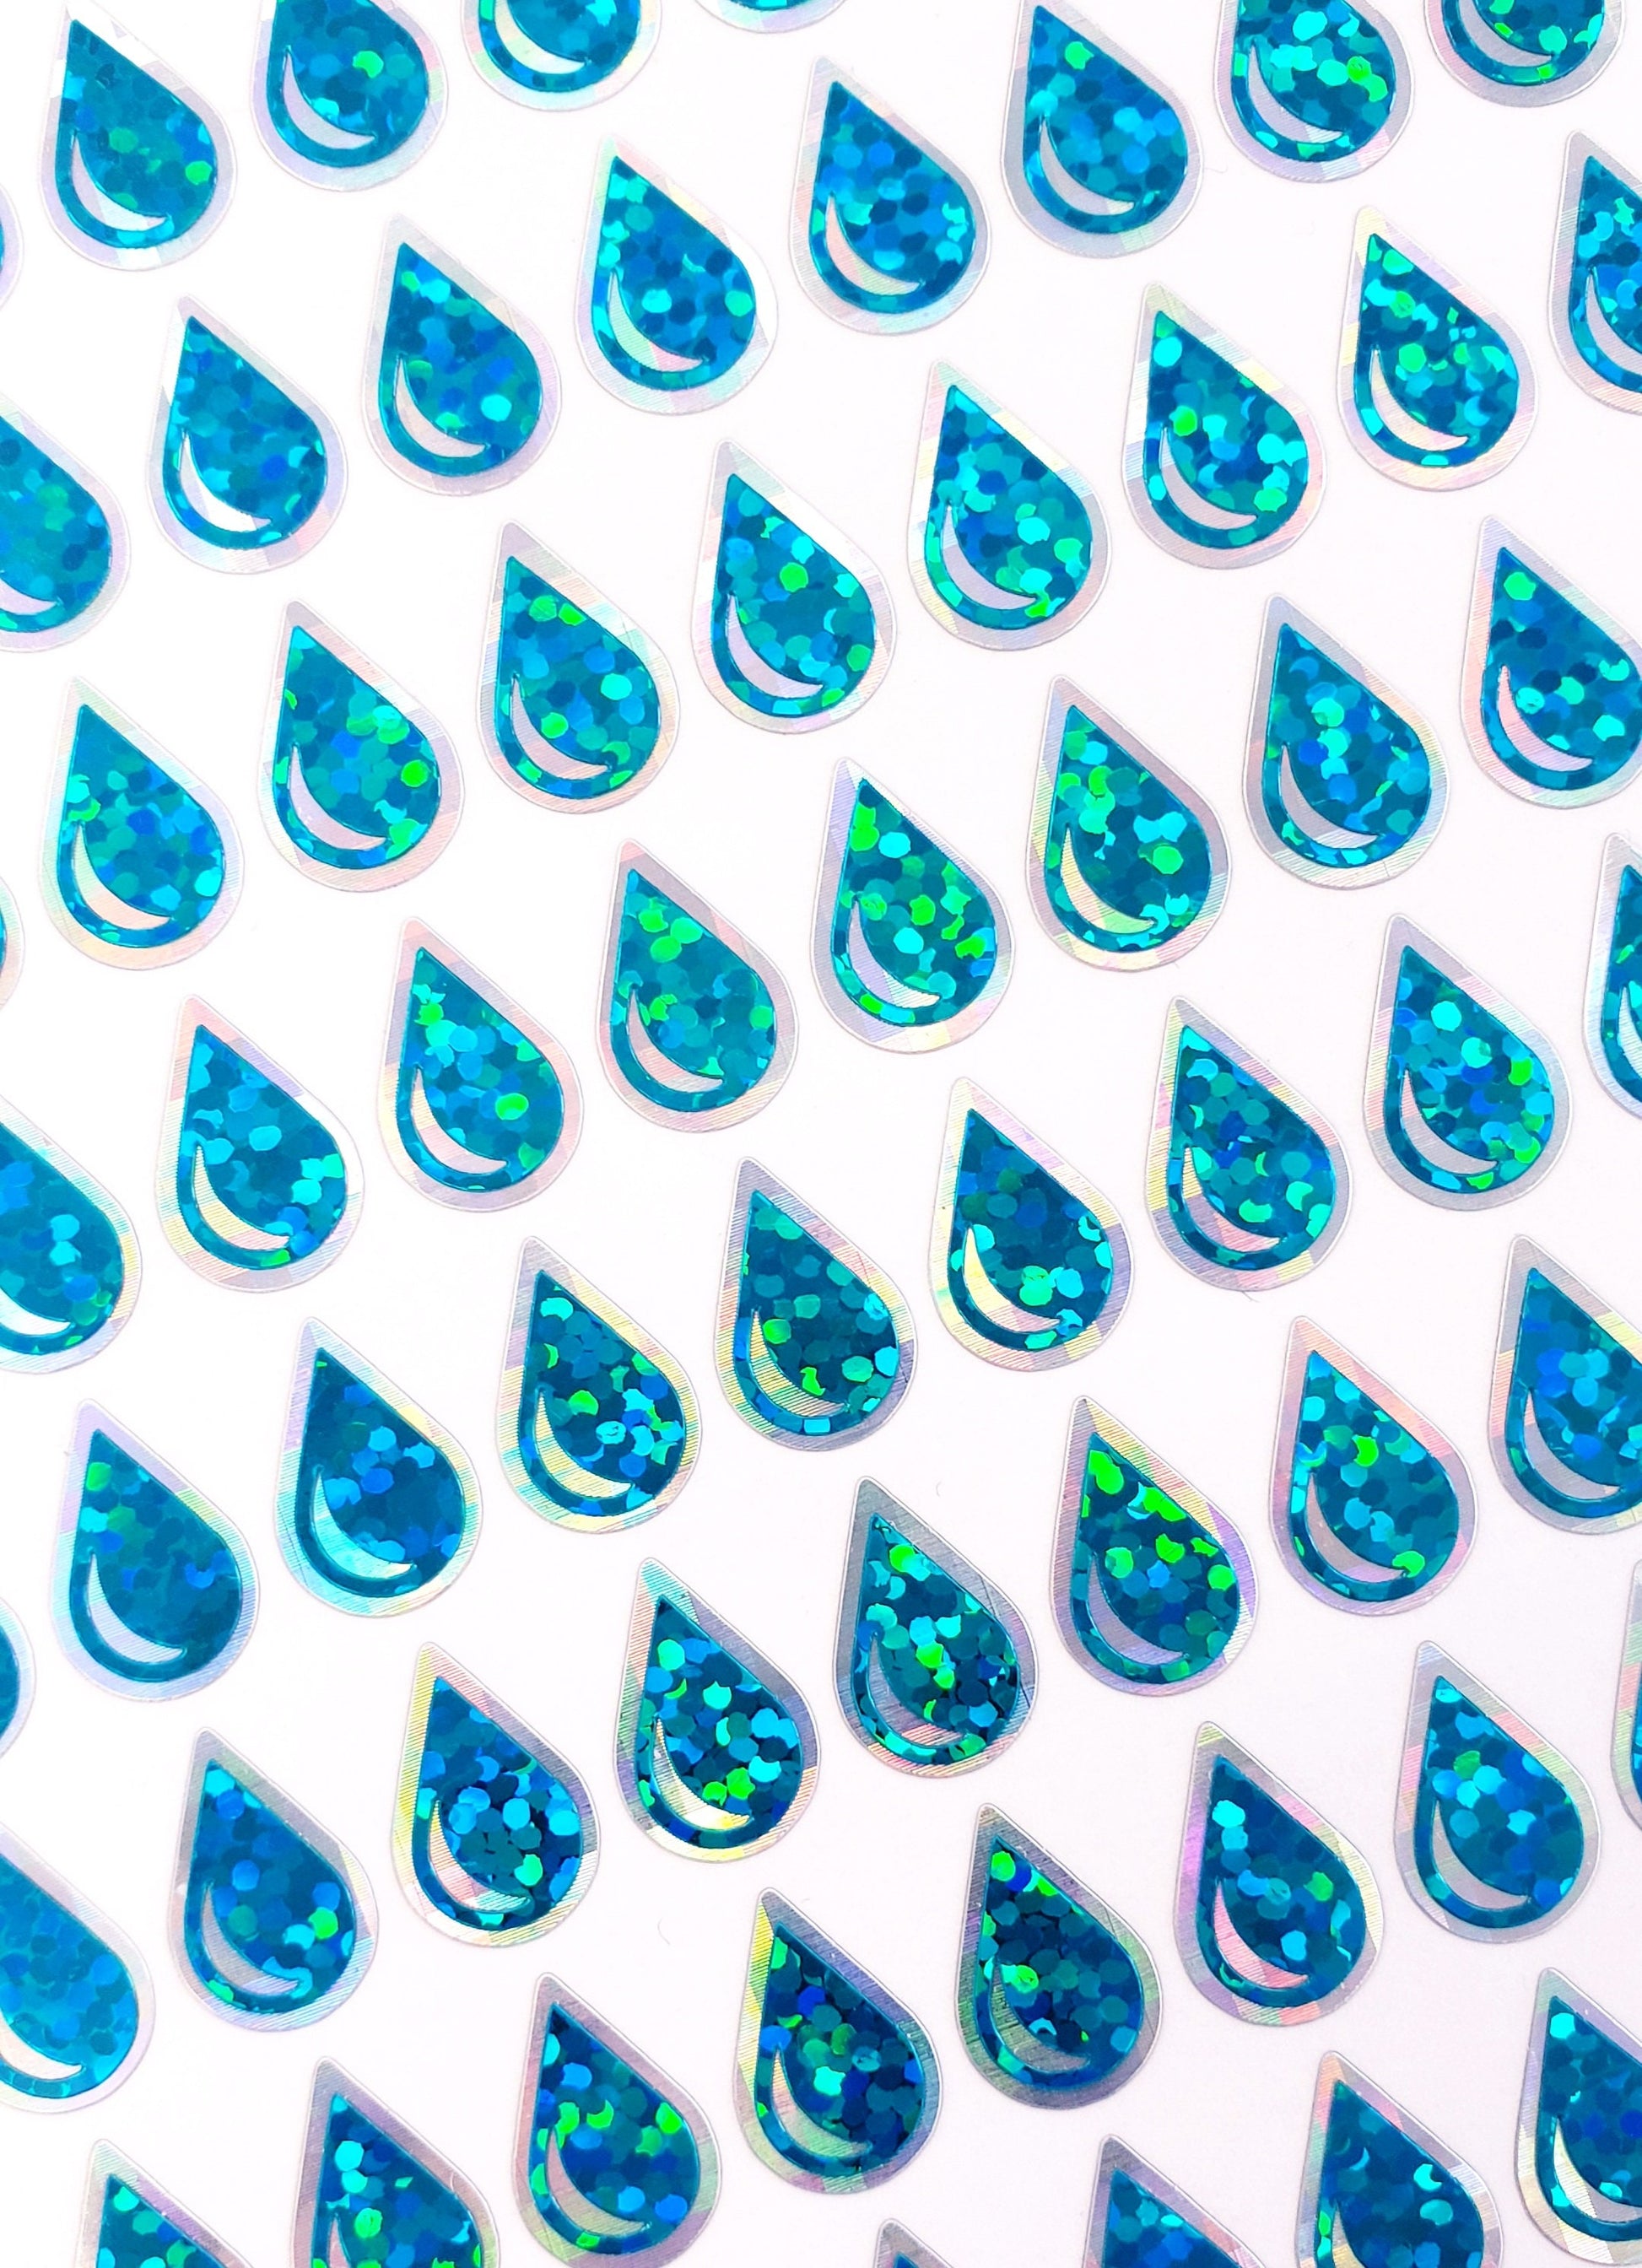 Teal Blue Green Water Drop Stickers, set of 136 sparkling turquoise raindrop vinyl decals, drink water tracker for journals and notebooks